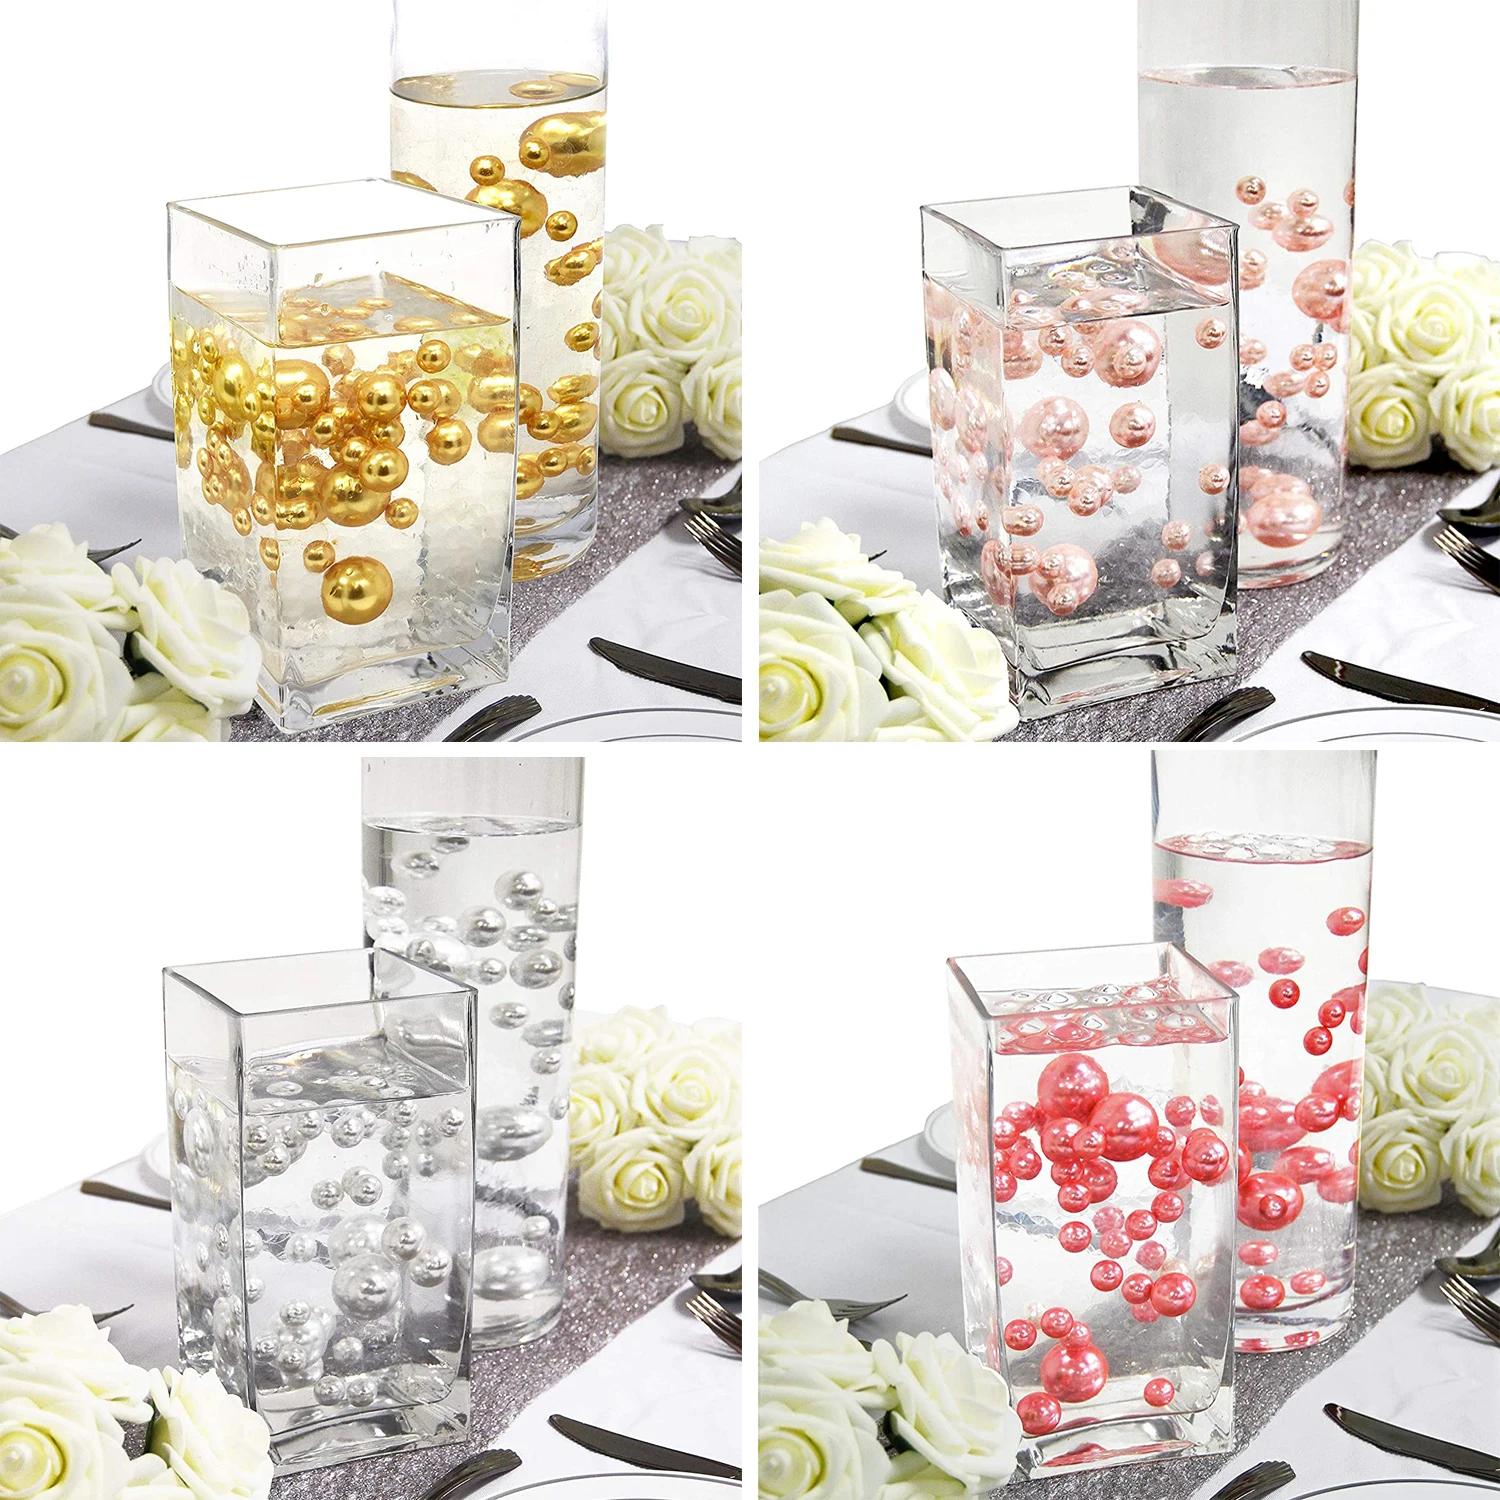 50pcs Floating Pearl Beads for Vases No Hole Highlight Pearls Includes Transparent Water Gels for Floating The Pearls Decoration